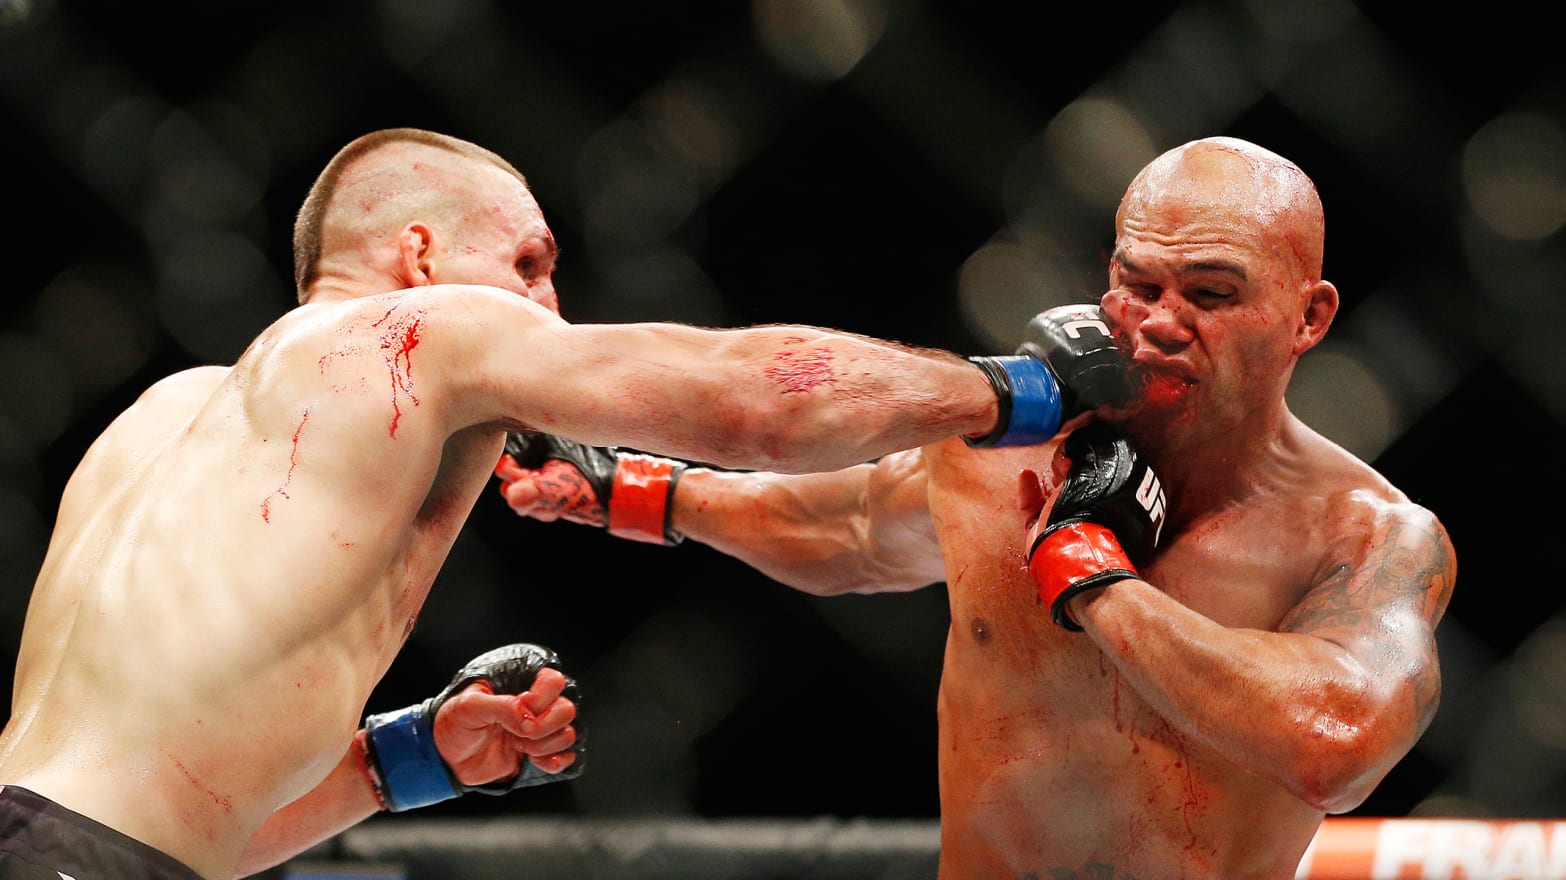 Hey UFC, Bring Stop Trauma Bare-knuckle Back to Fights Brain